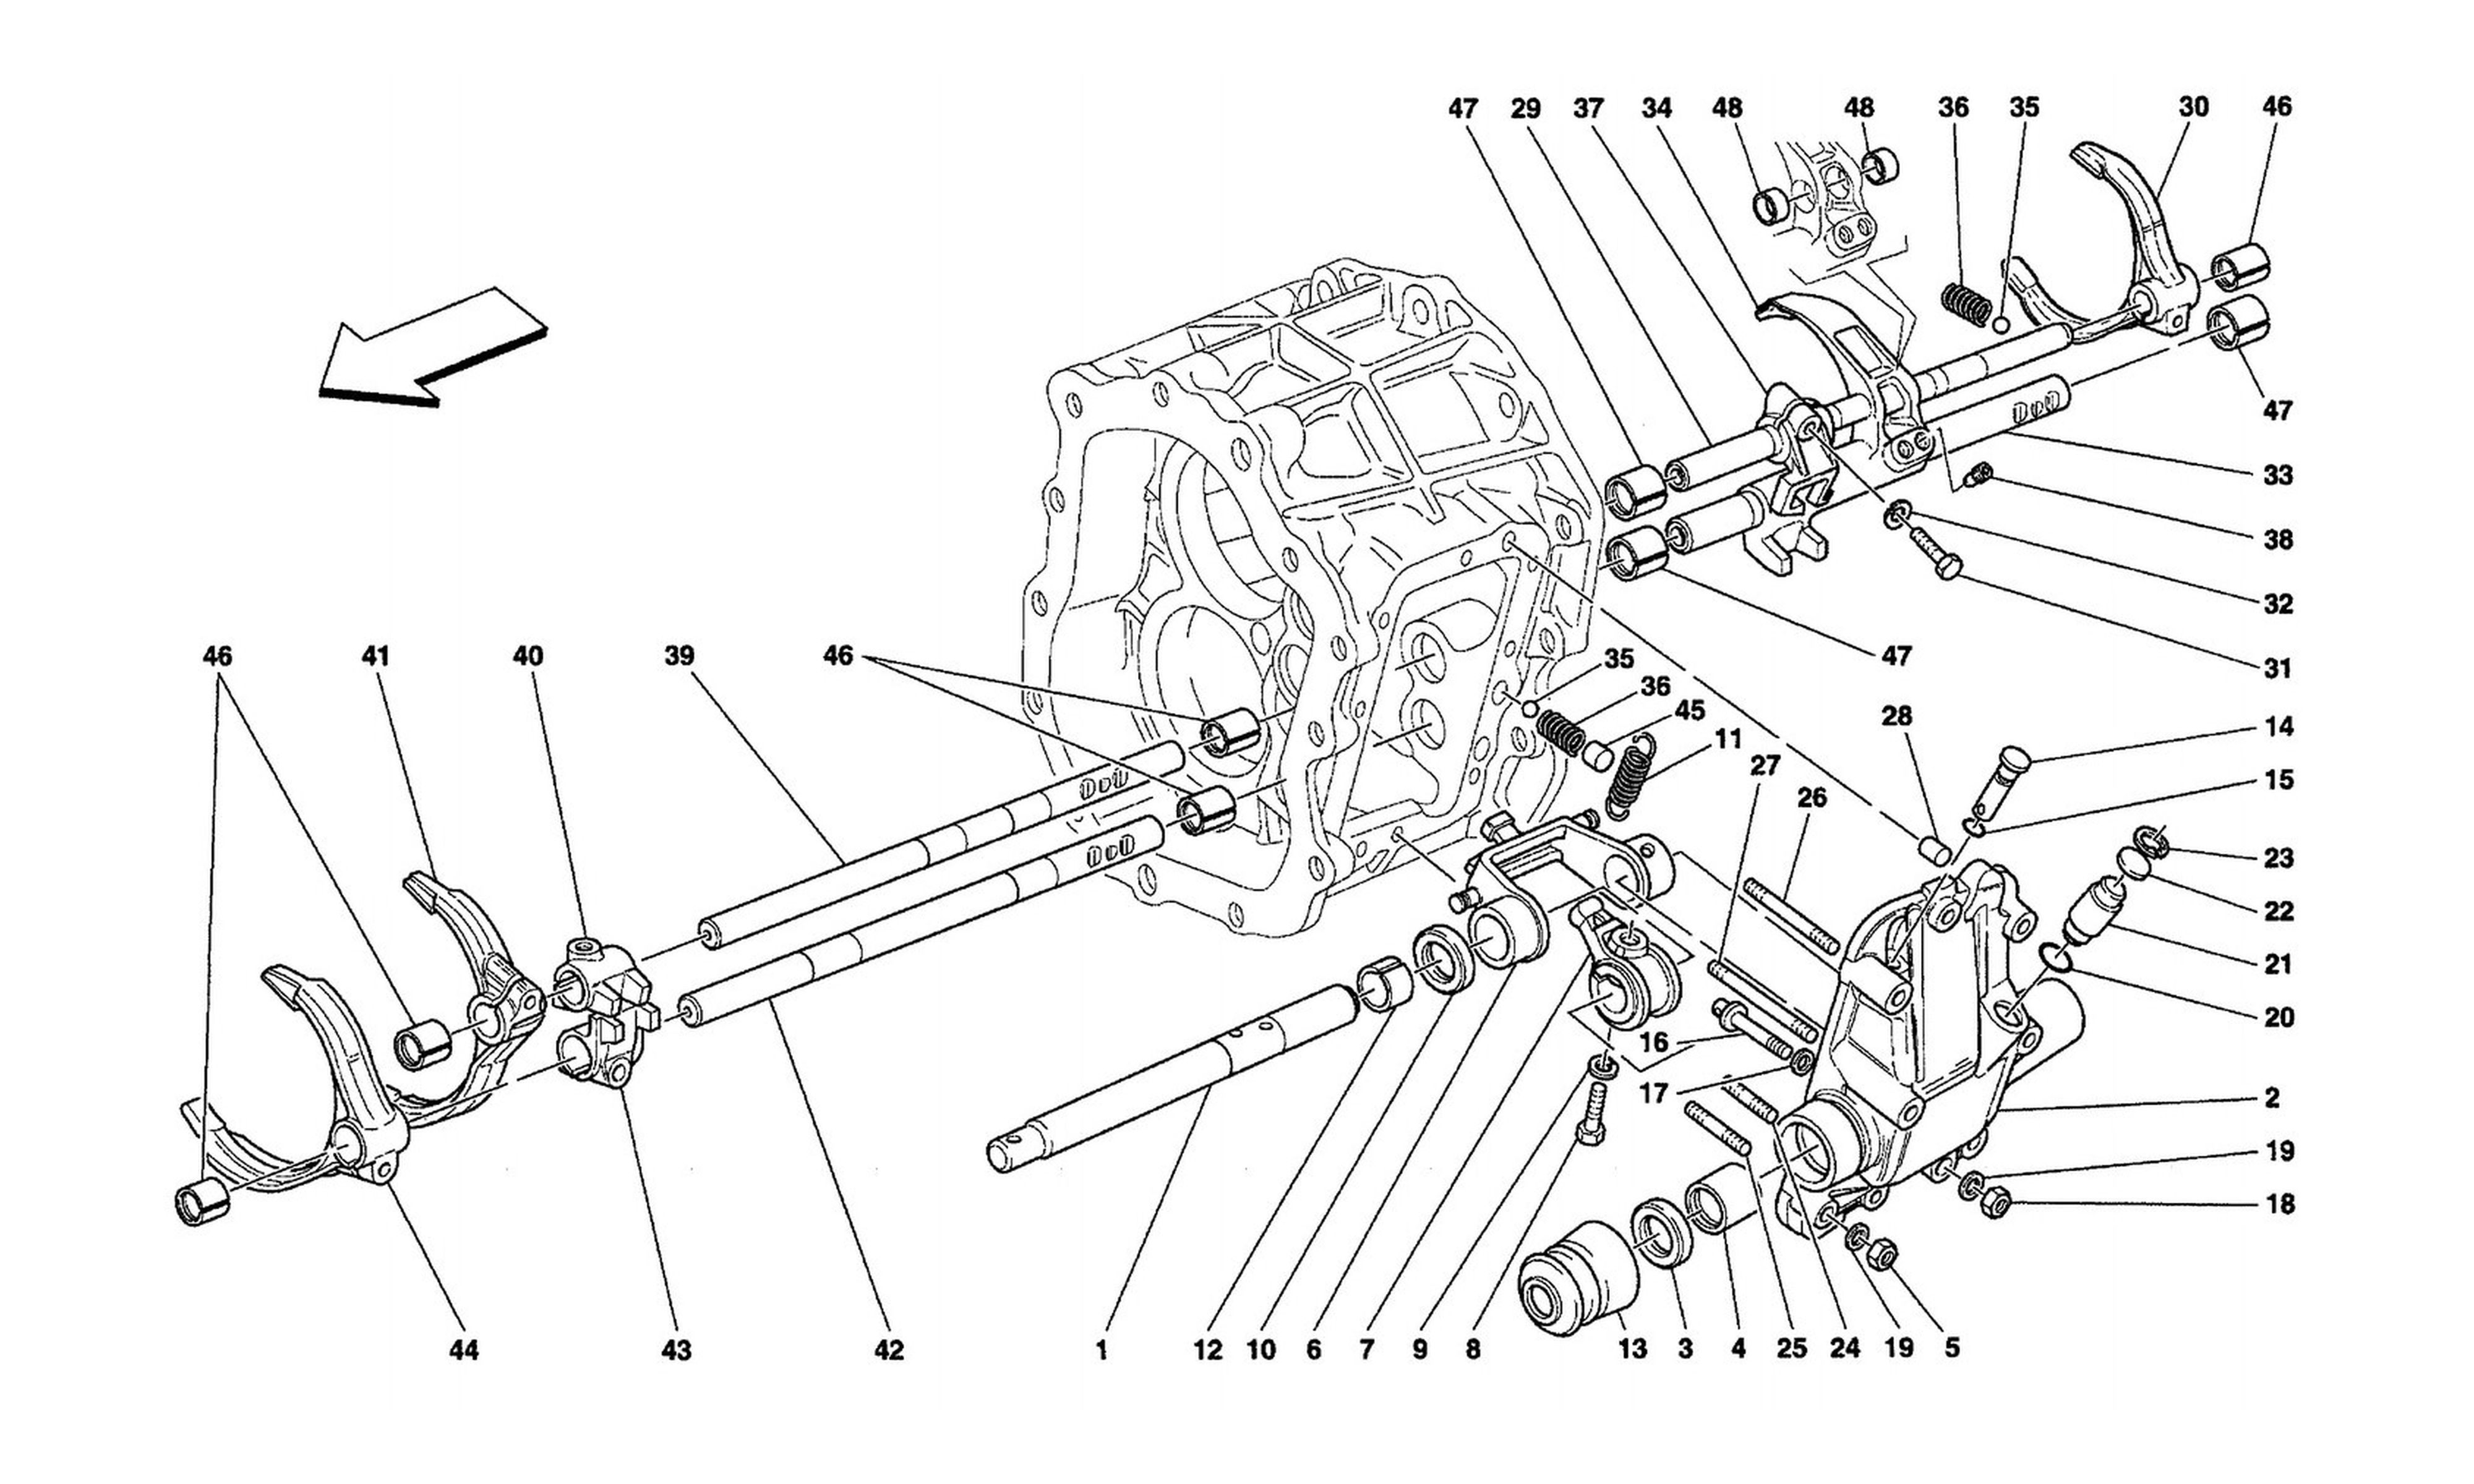 Schematic: Inside Gearbox Controls -Not For F1-